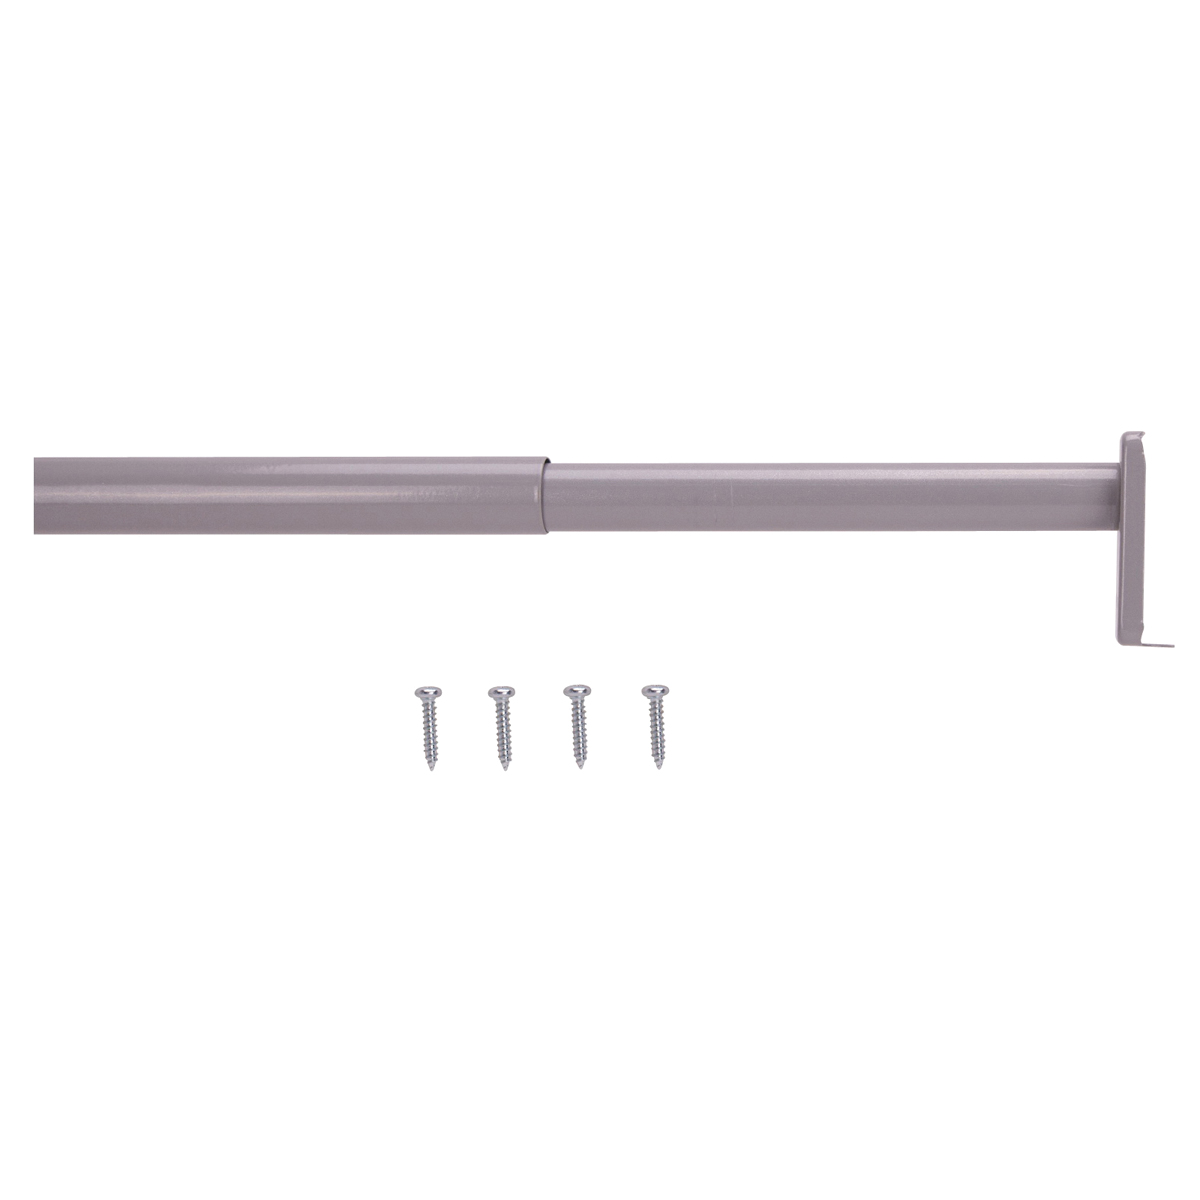 21013ZCX-PS Adjustable Closet Rod, 30 to 48 in L, Steel, Silver